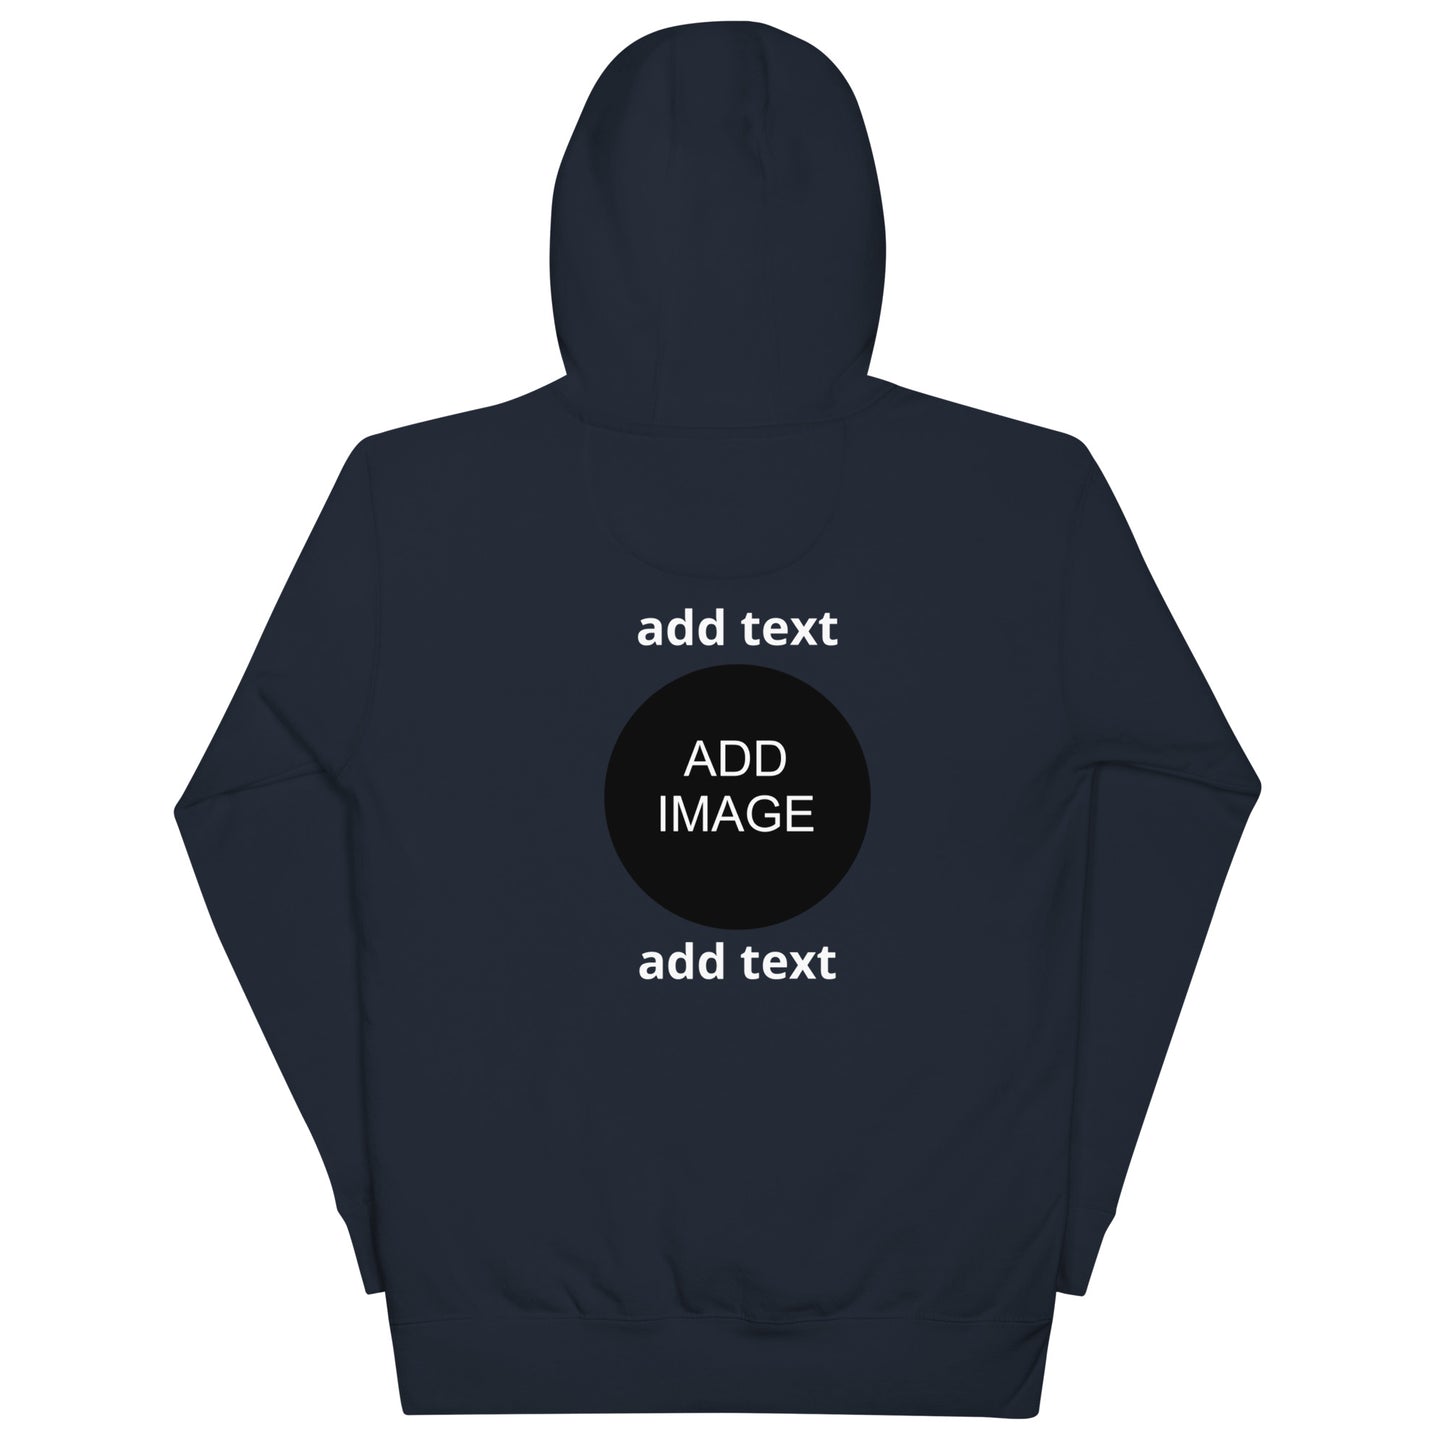 Customizable Hoodie - Front and Back - Image and Text - Unisex